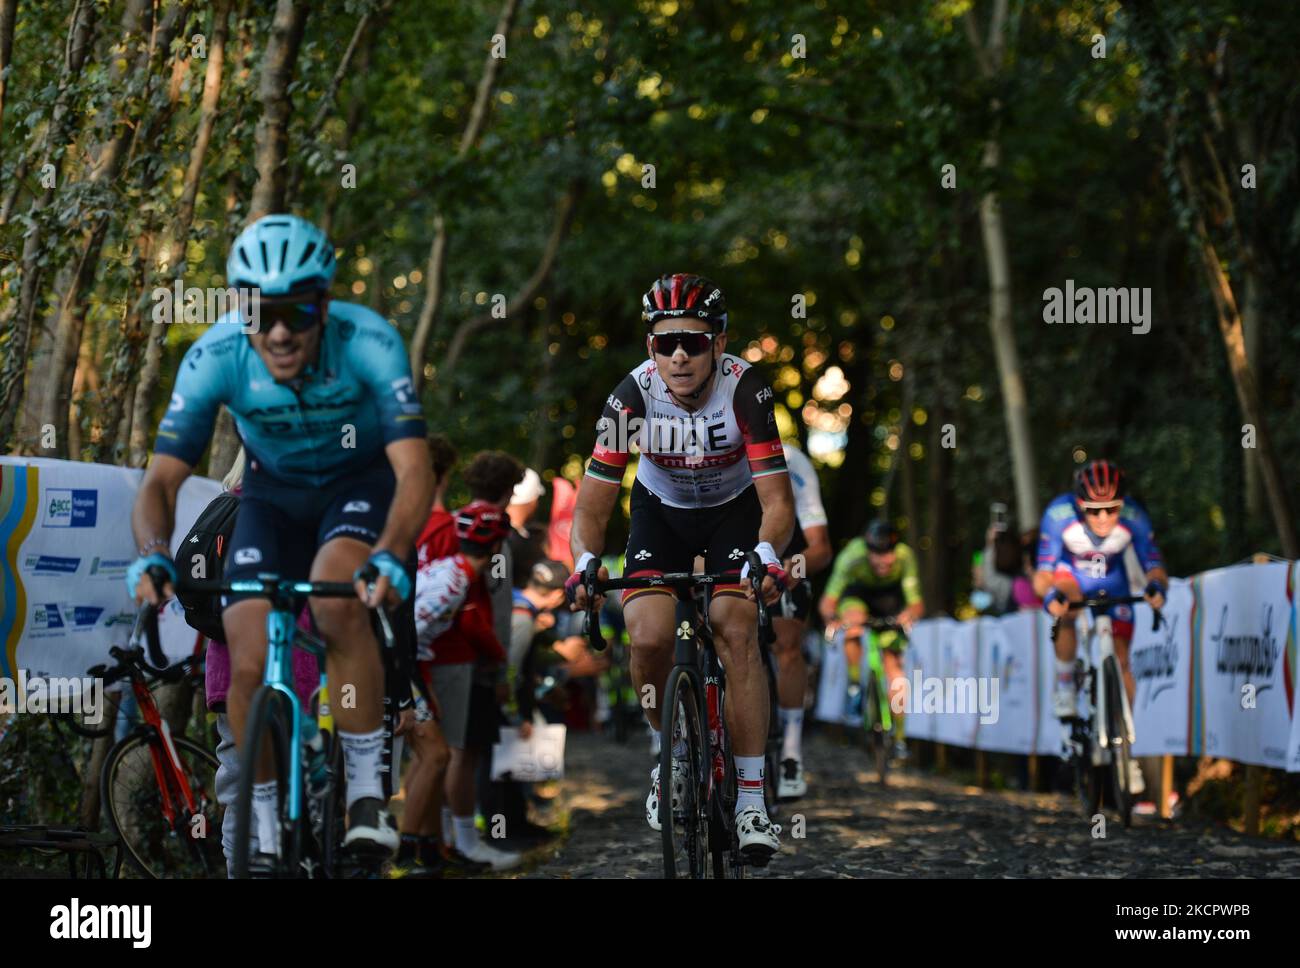 Riders in action at the Muro della Tisa, a cycling climb located in the Province of Vicenza, during the first edition of the Veneto Classic, the 207km pro cycling race from Venezia to Bassano del Grappa, held in the Veneto region. On Sunday, October 17, 2021, in Bassano del Grappa, Veneto, Italy. (Photo by Artur Widak/NurPhoto via Getty Images) (Photo by Artur Widak/NurPhoto) Stock Photo